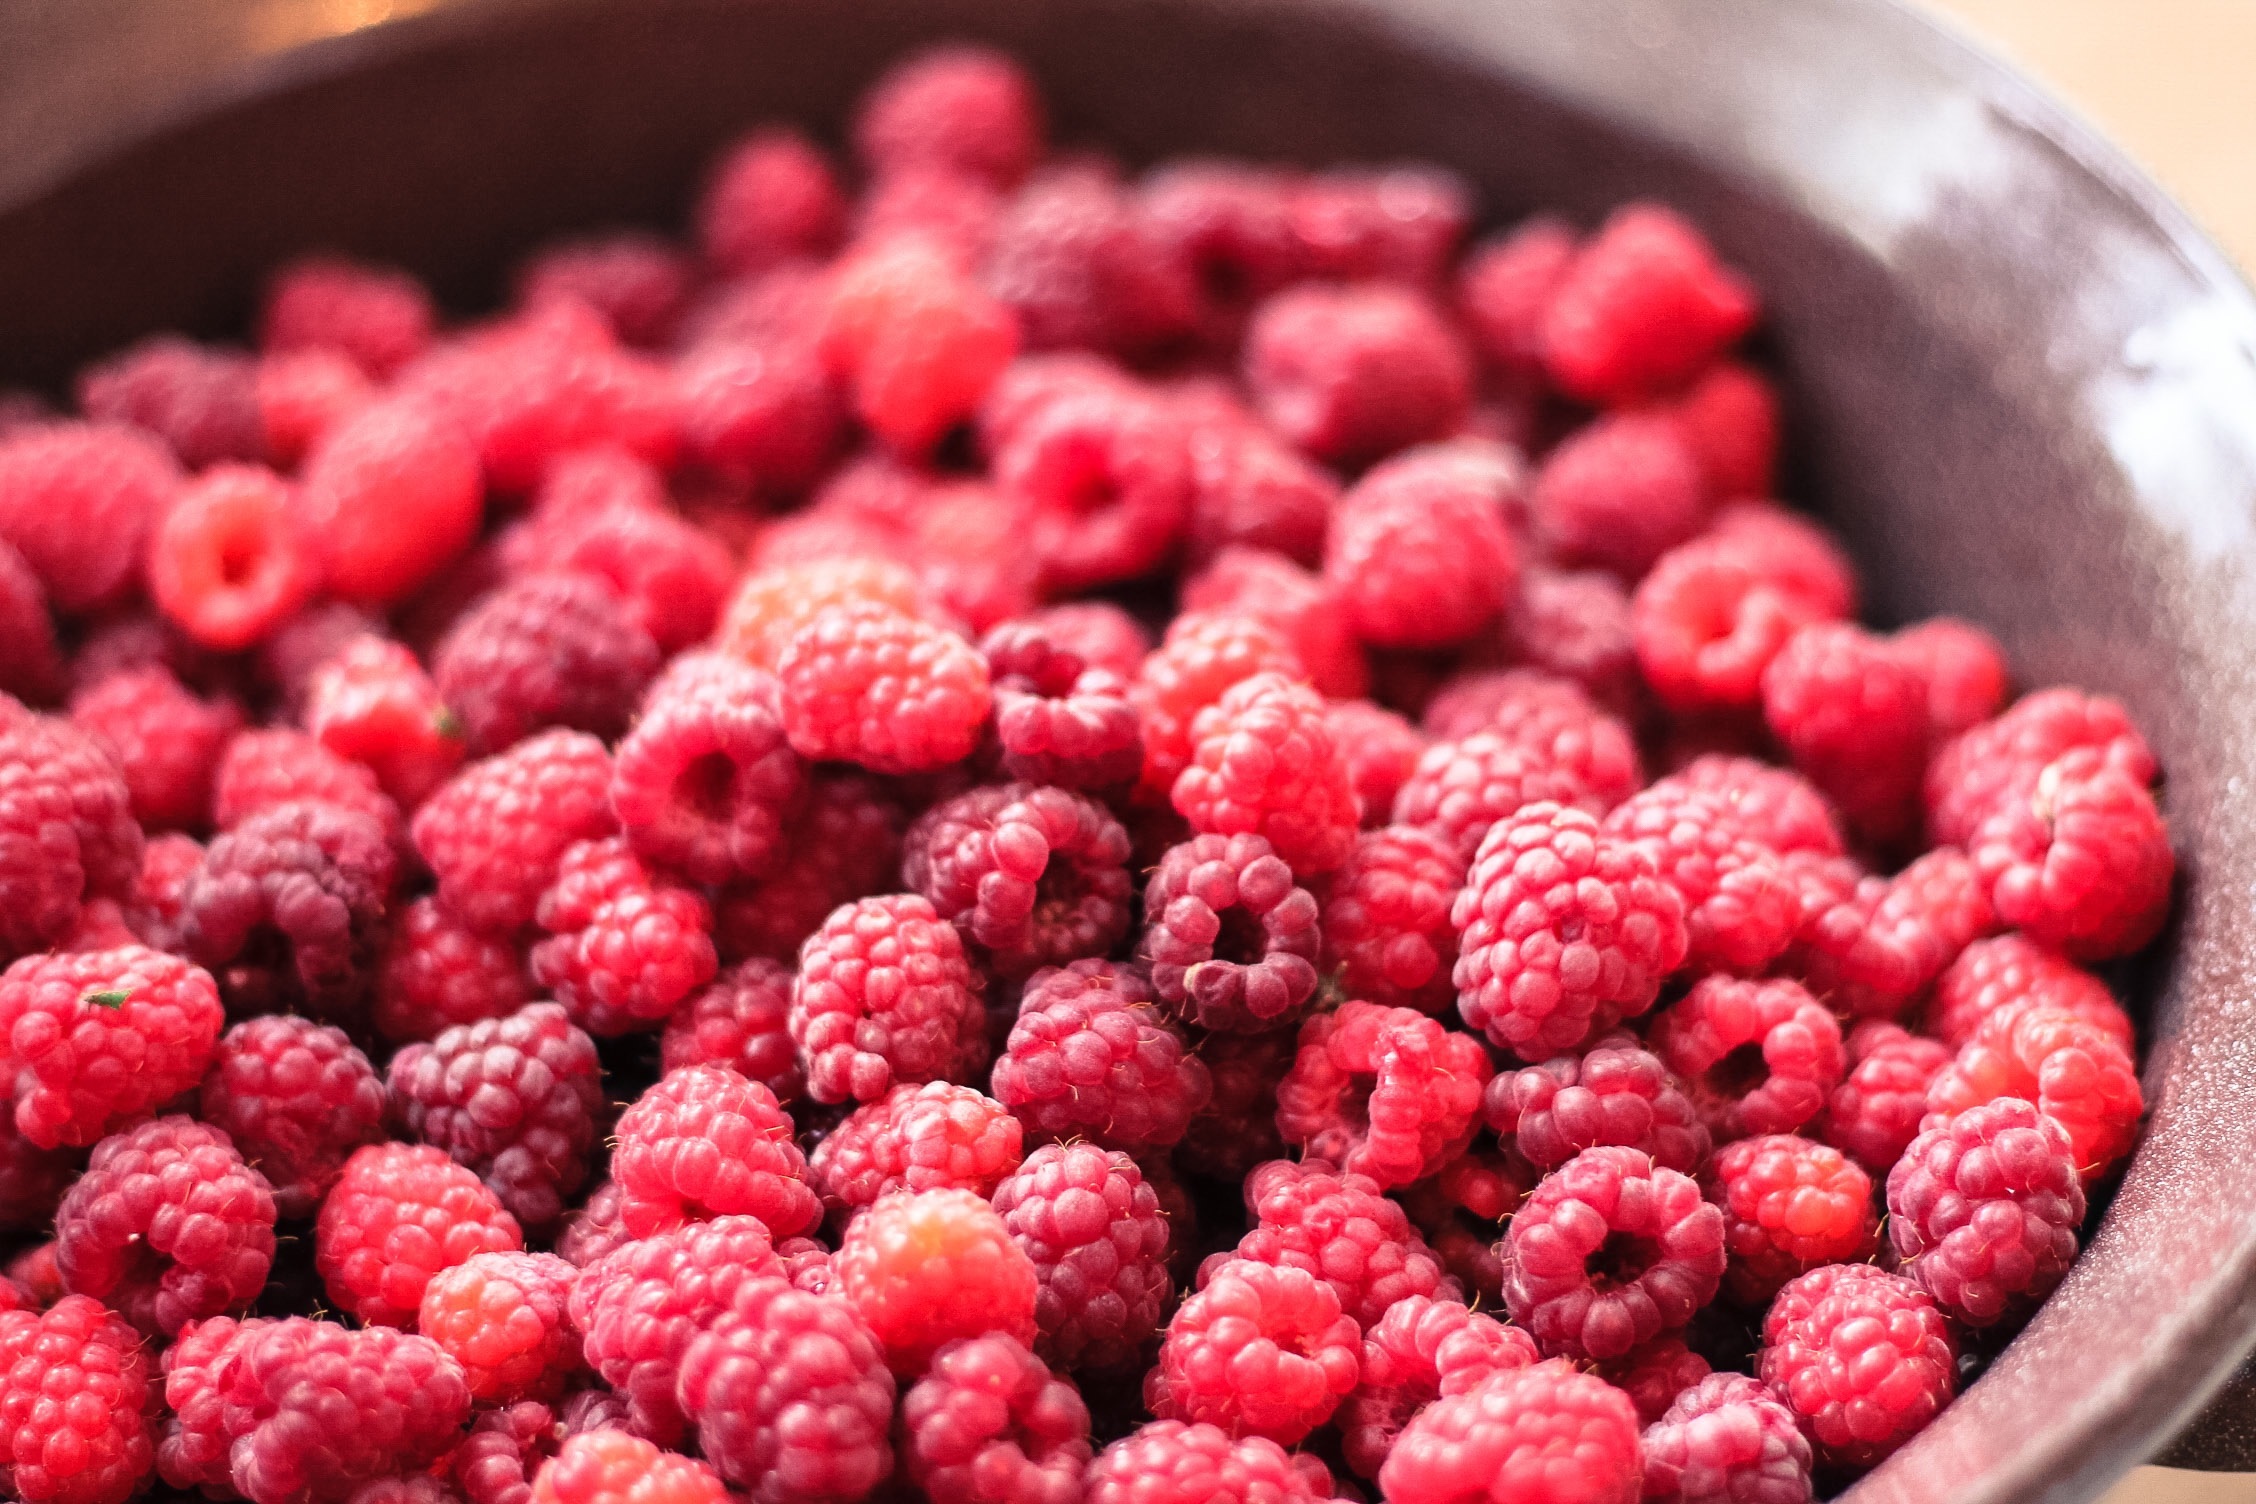 143945 download wallpaper food, raspberry, berries, plate, ripe screensavers and pictures for free